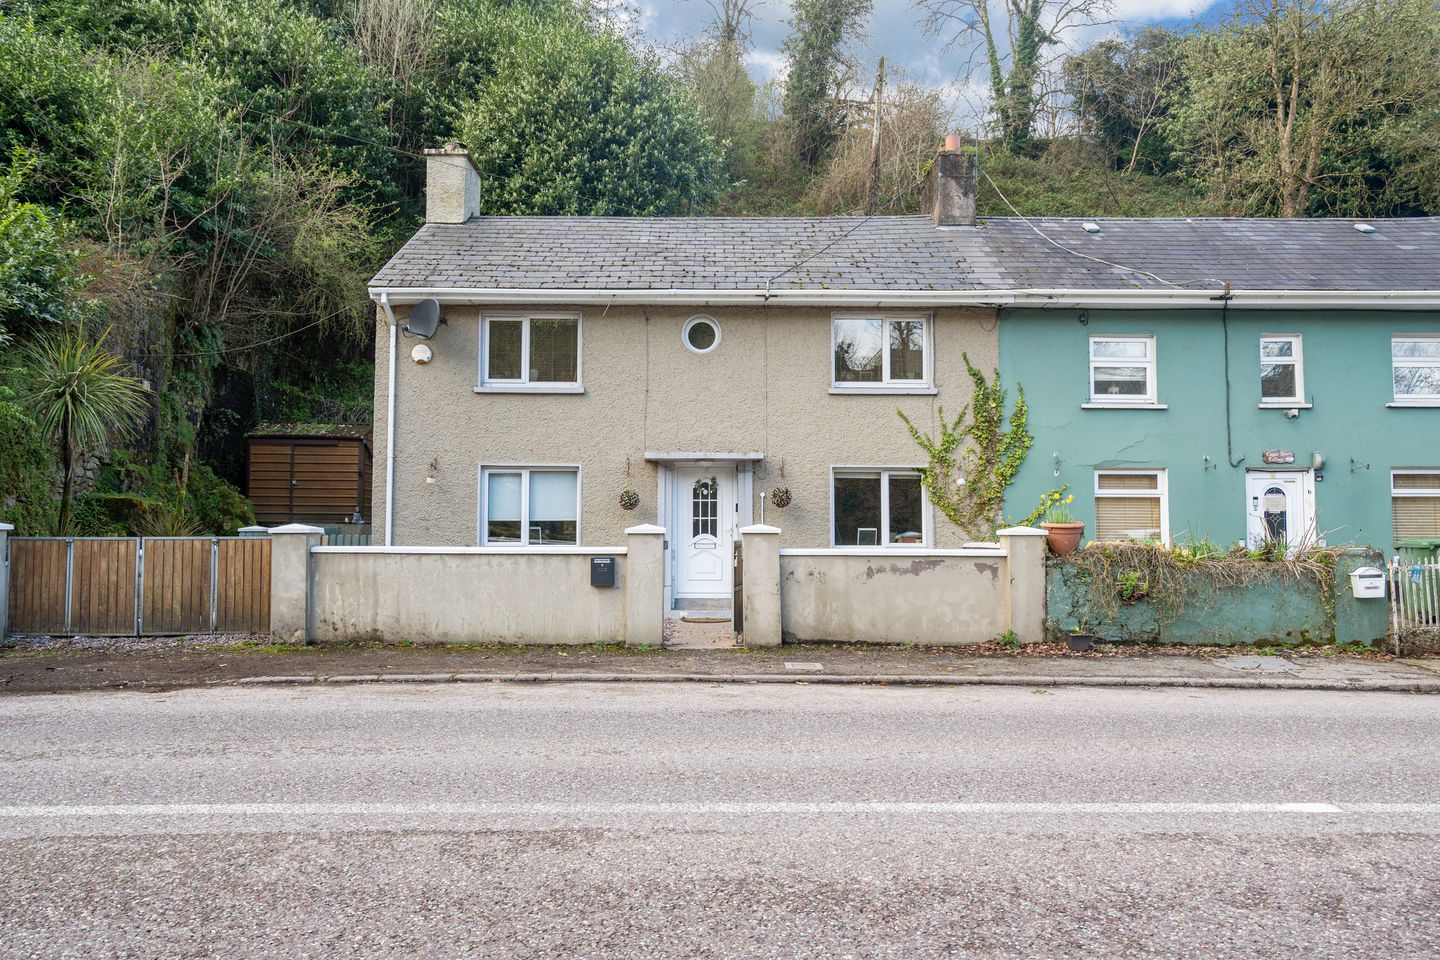 Rose Cottage, 1 The Groves, Glanmire, Co. Cork, T45A025